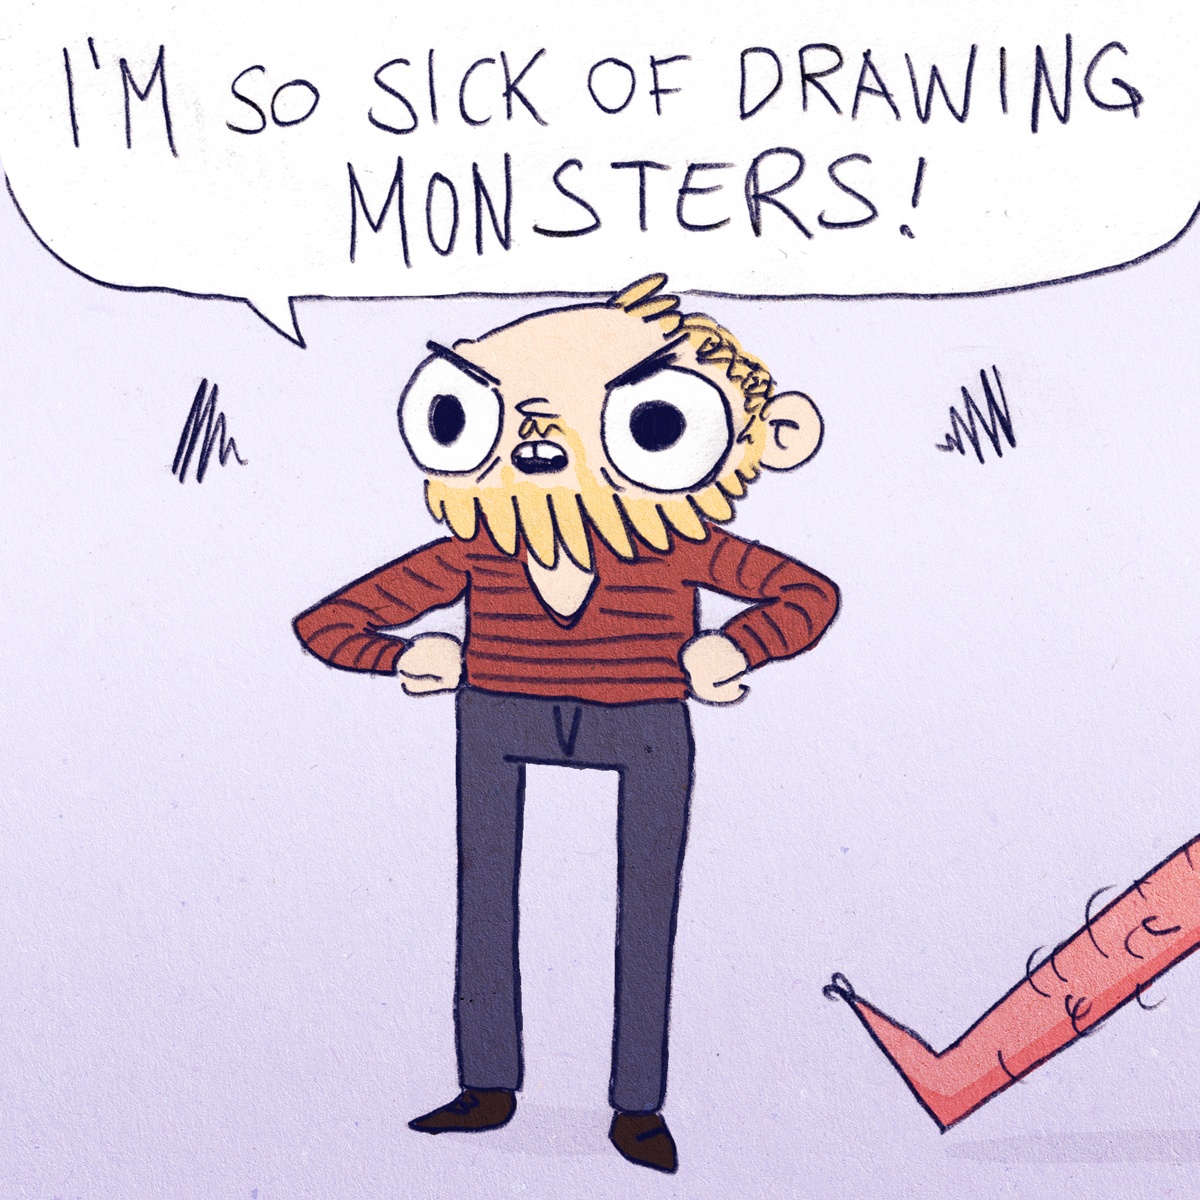 Monster comic sick of drawing them 1